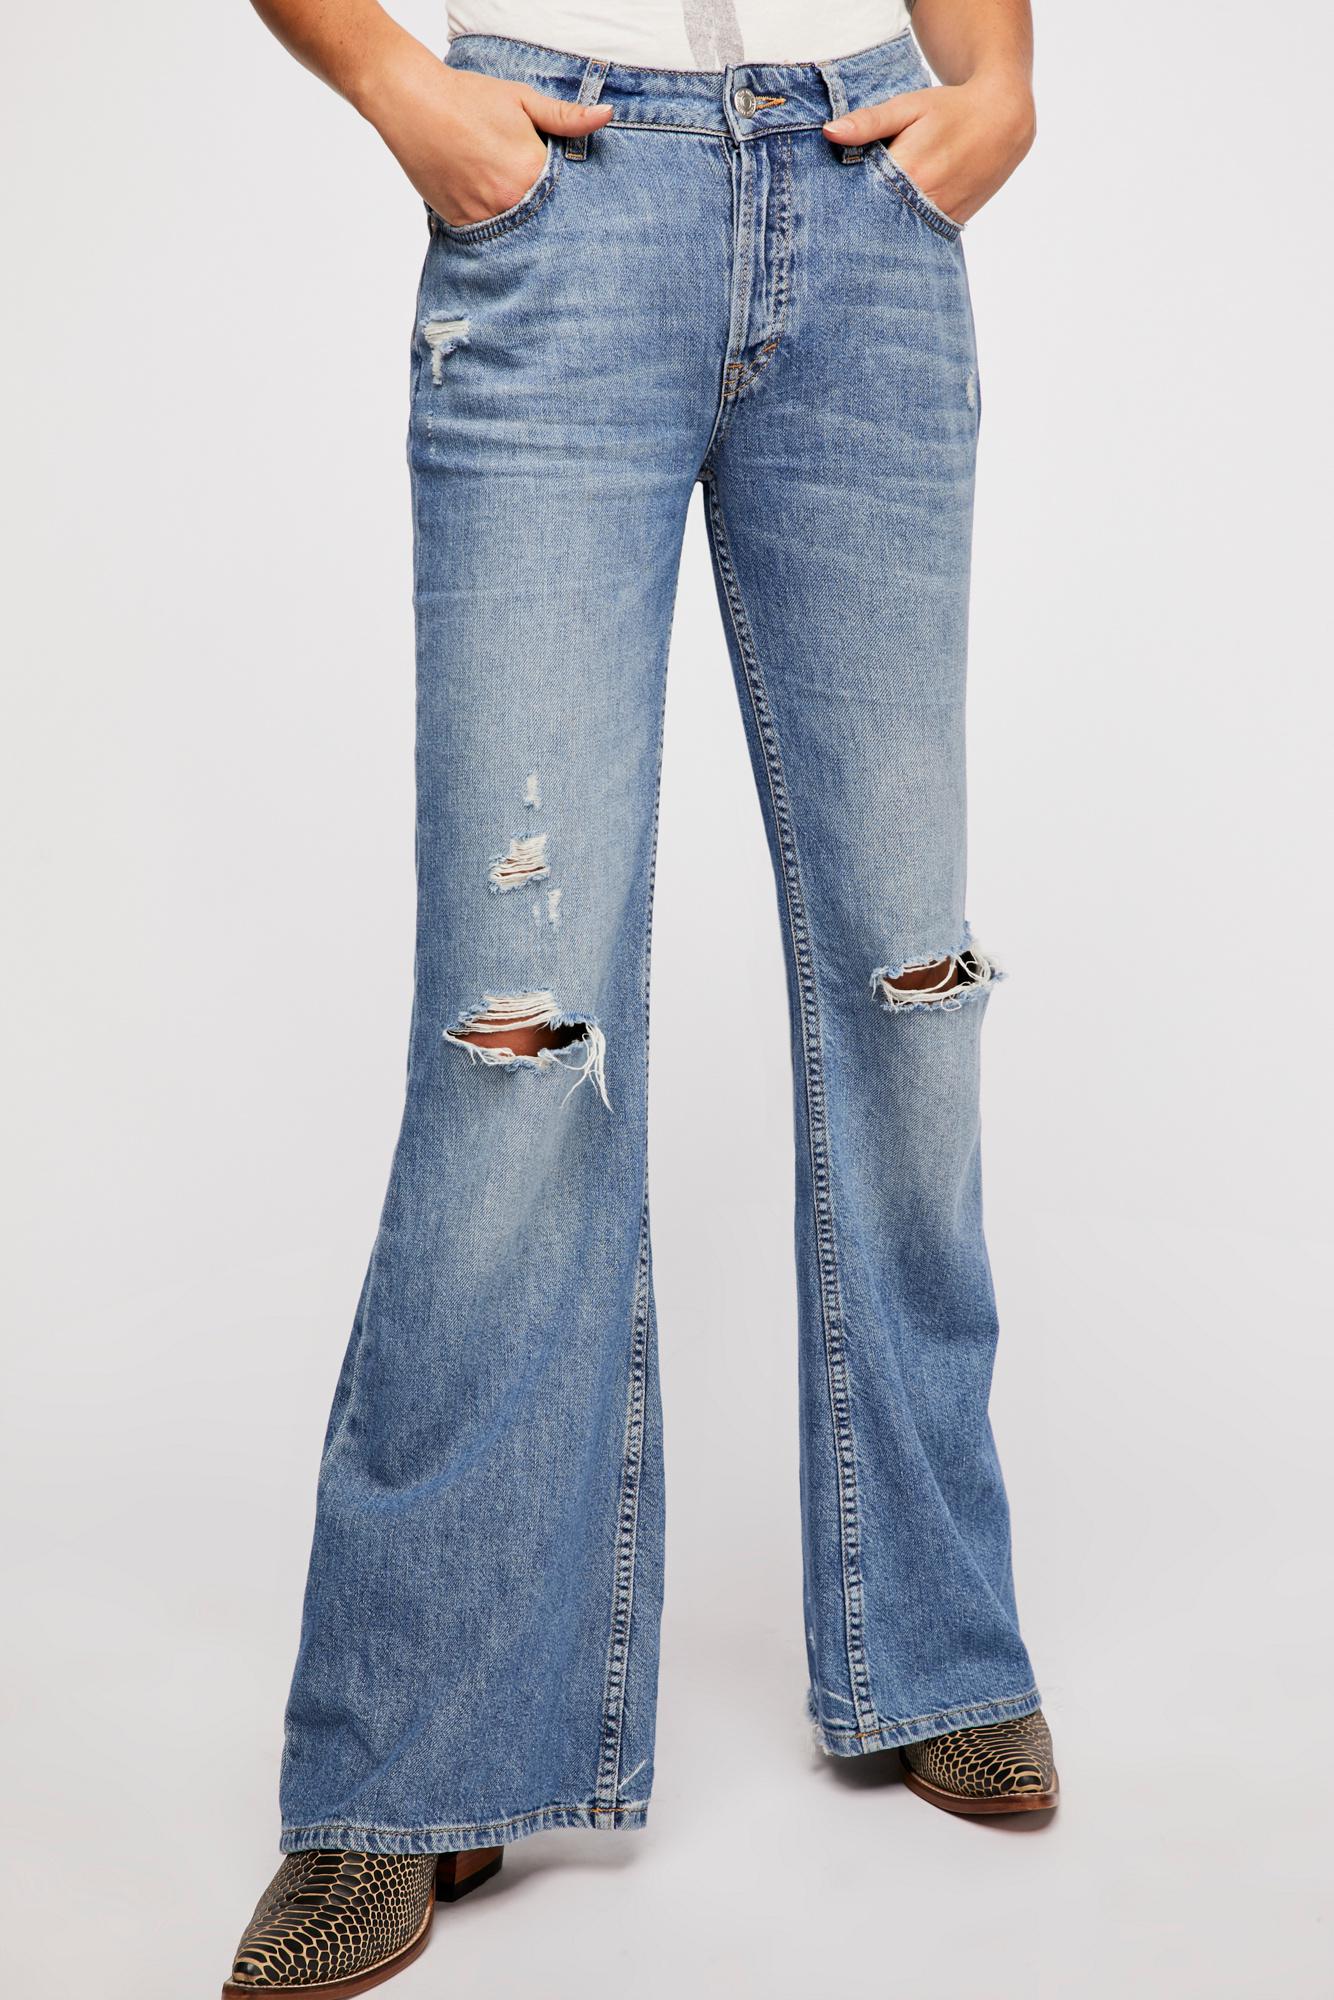 Free People Denim Relaxed Heritage Flare Jeans in Blue - Lyst